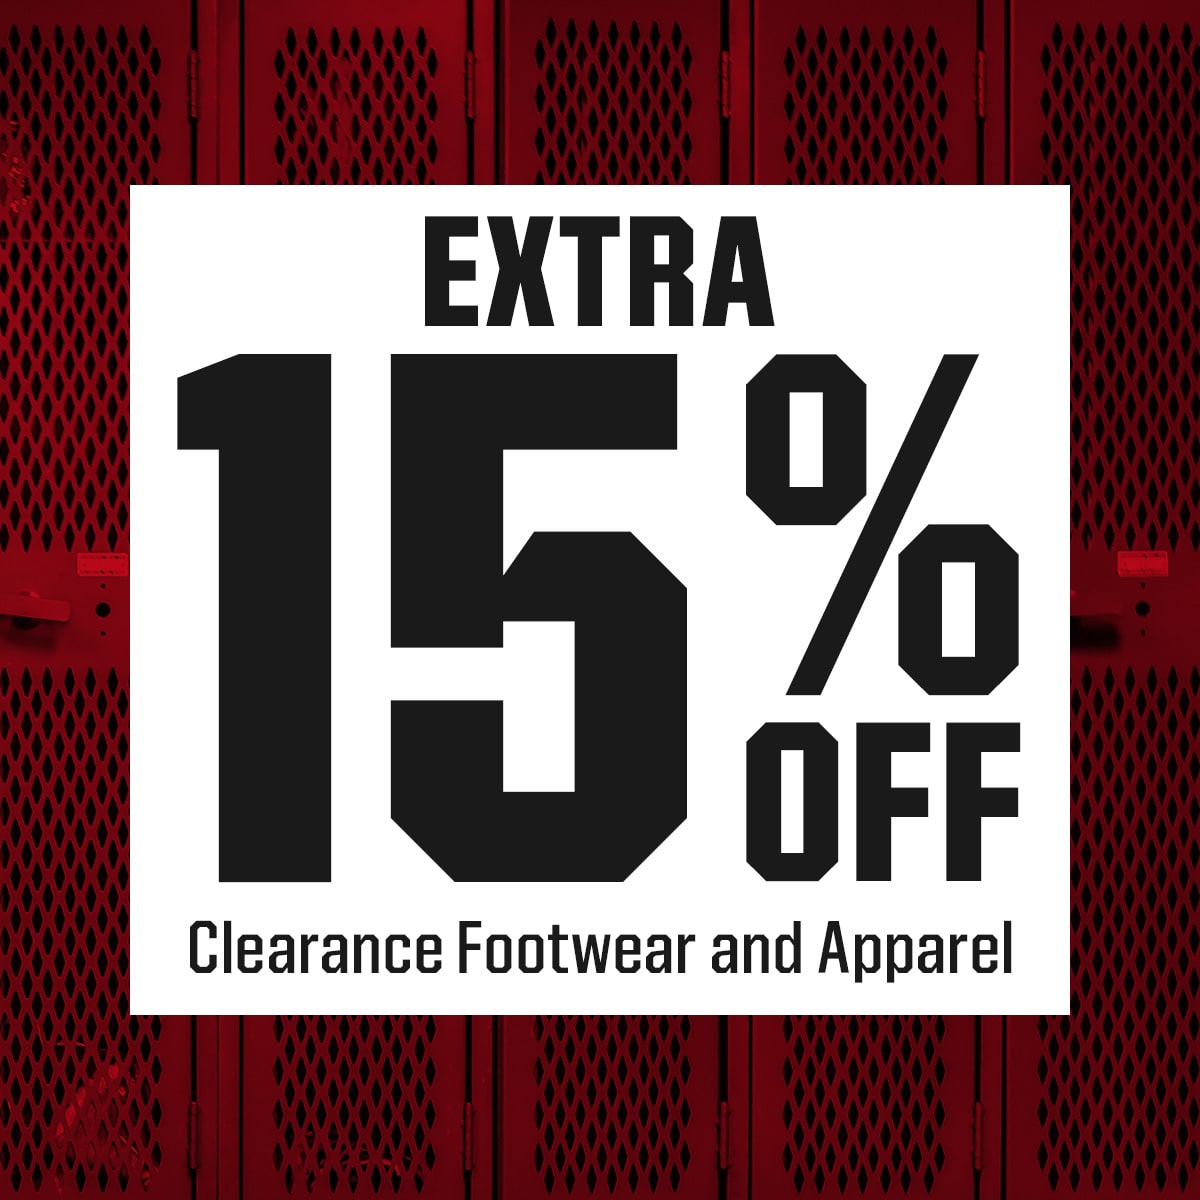 Extra 15% off clearance footwear and apparel.